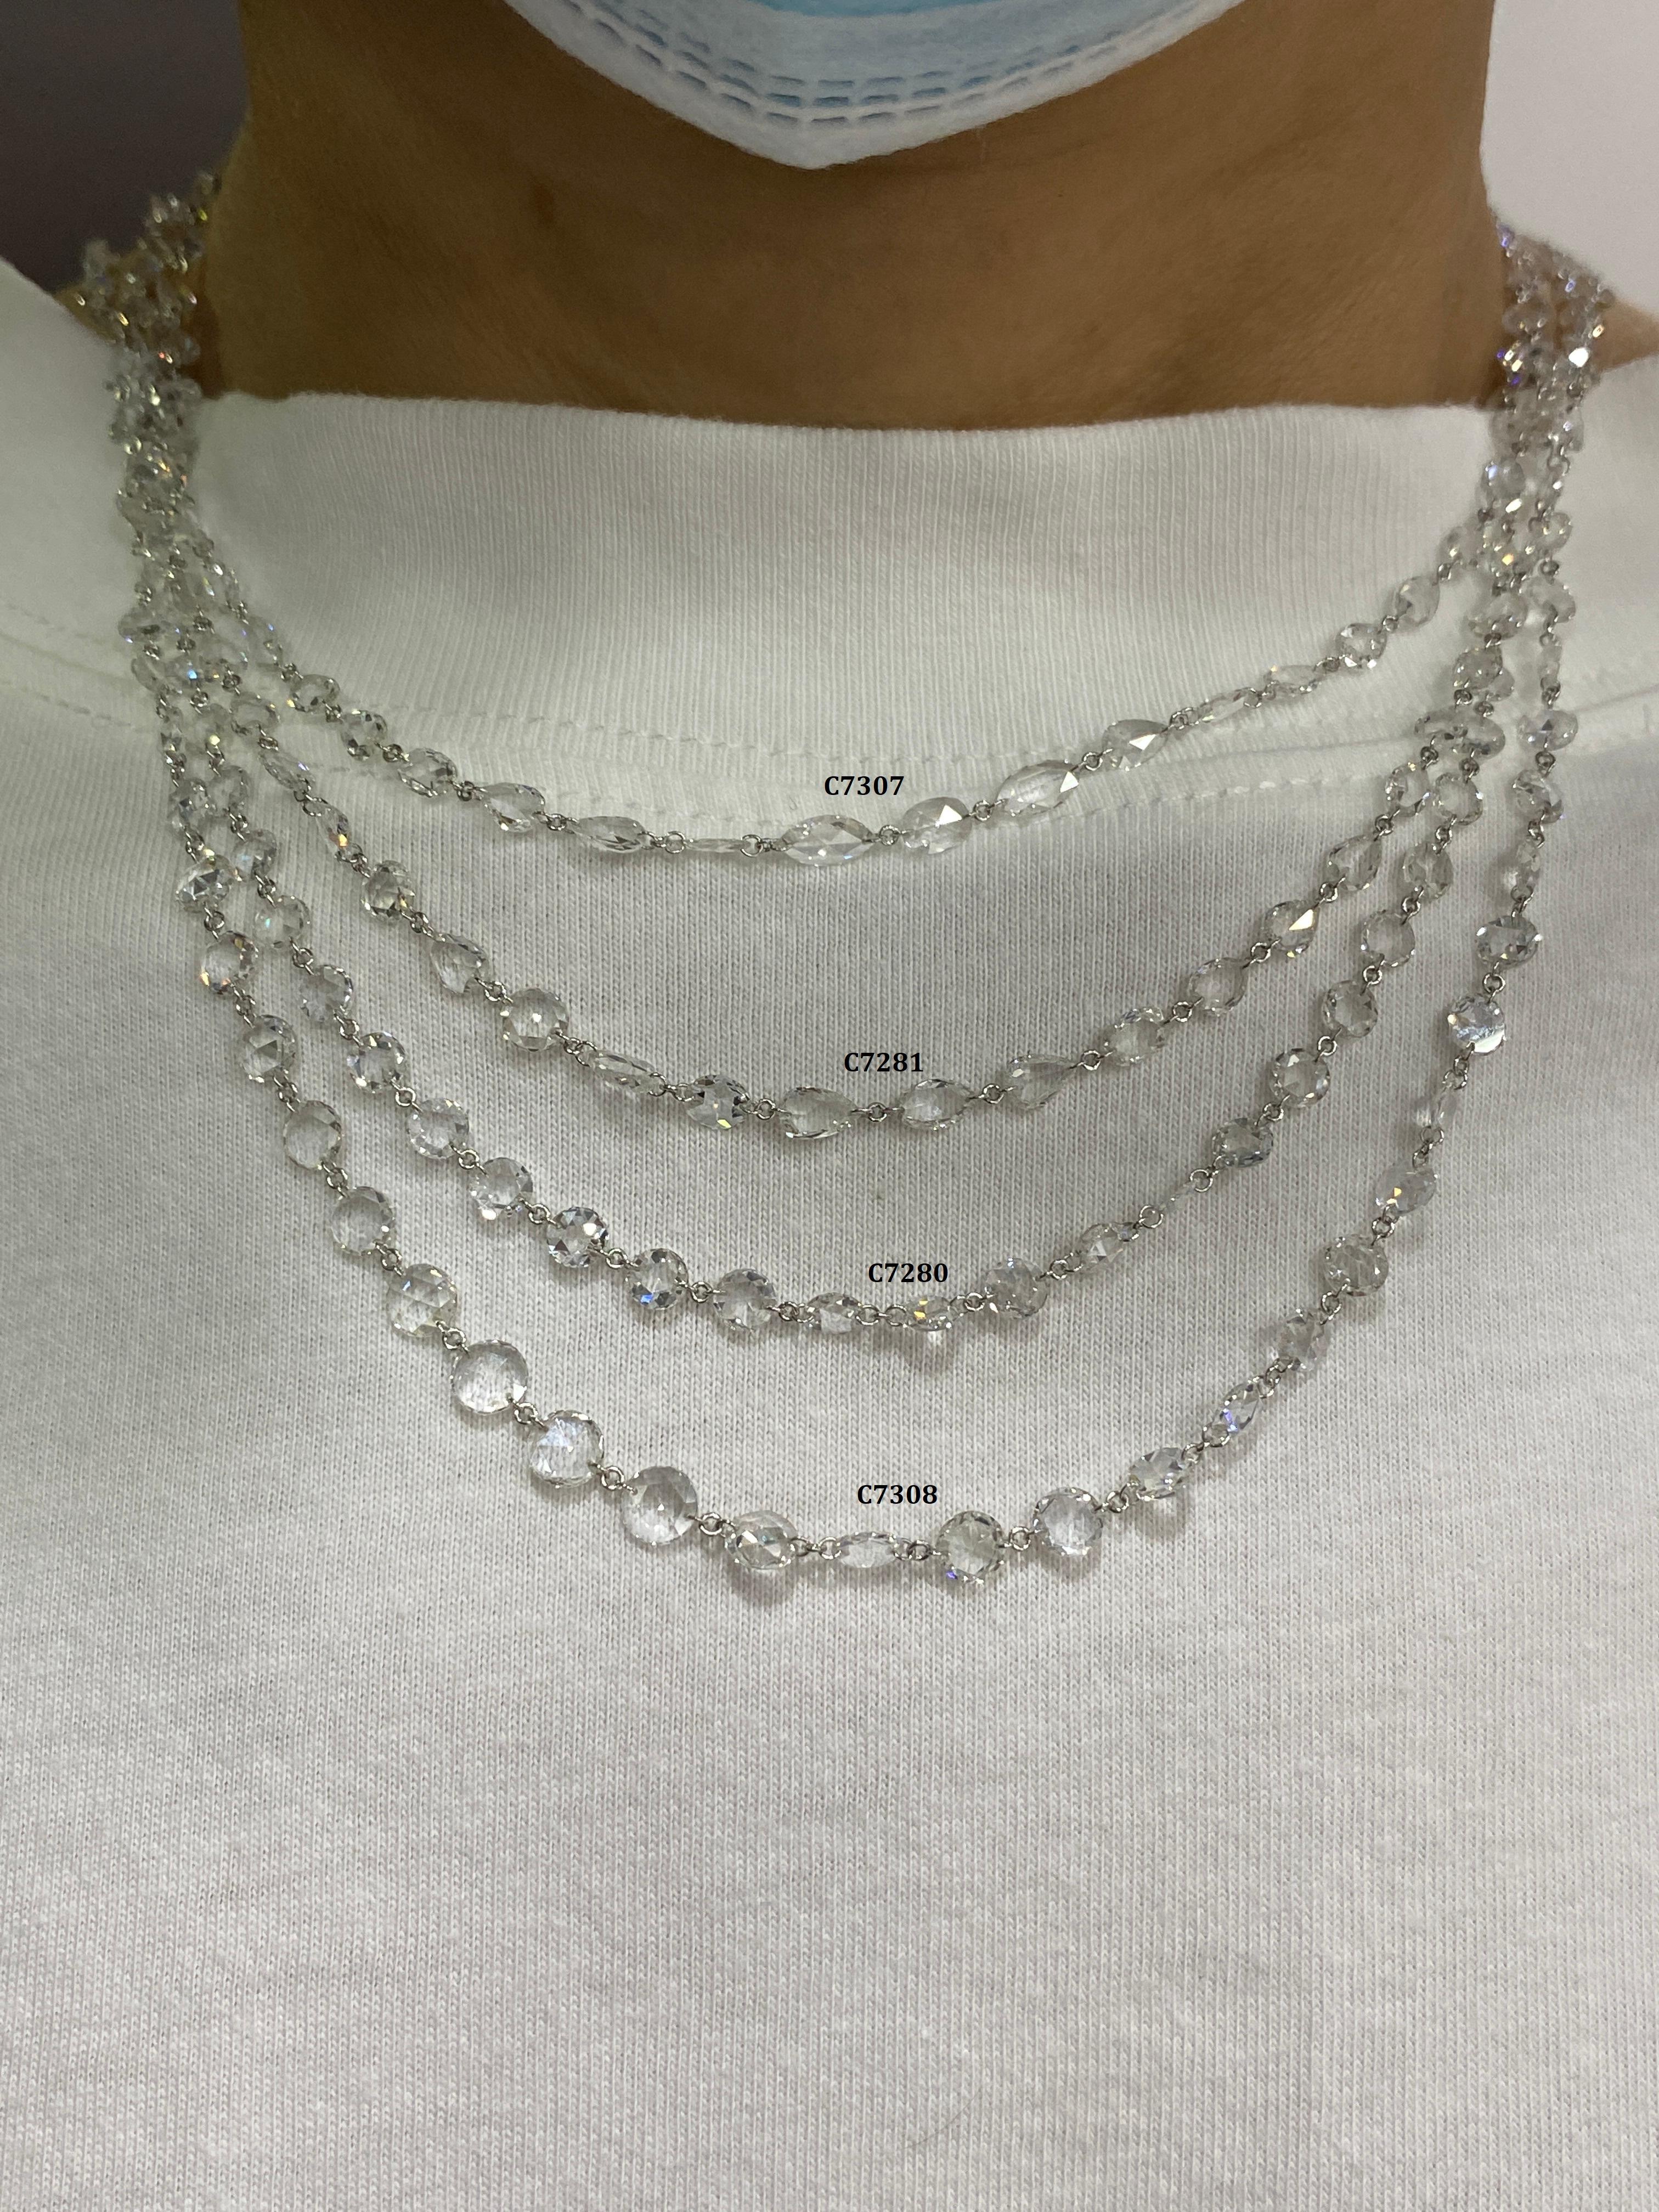 JR 10.20 Carat White Rose Cut Diamond Necklace 18 Karat White Gold In New Condition For Sale In Hong Kong, HK